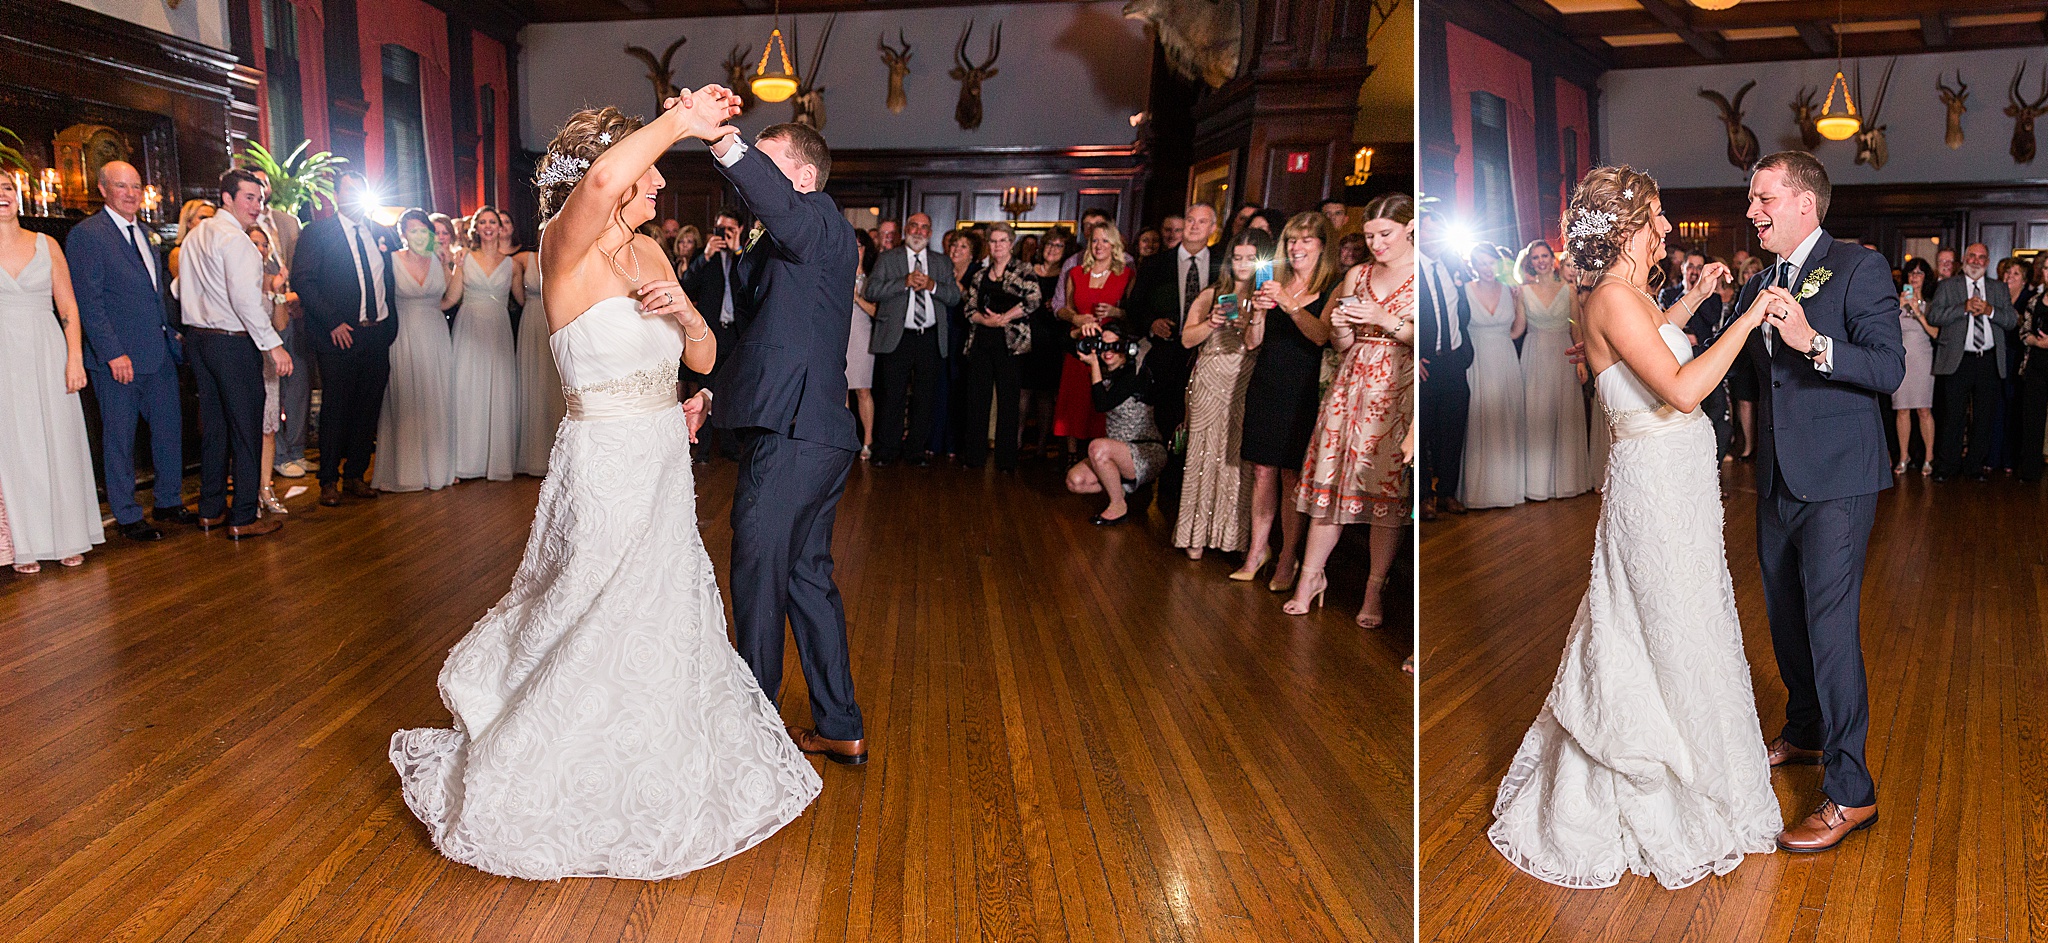 first dance at Maryland Club wedding photographed by Alexandra Mandato Photography